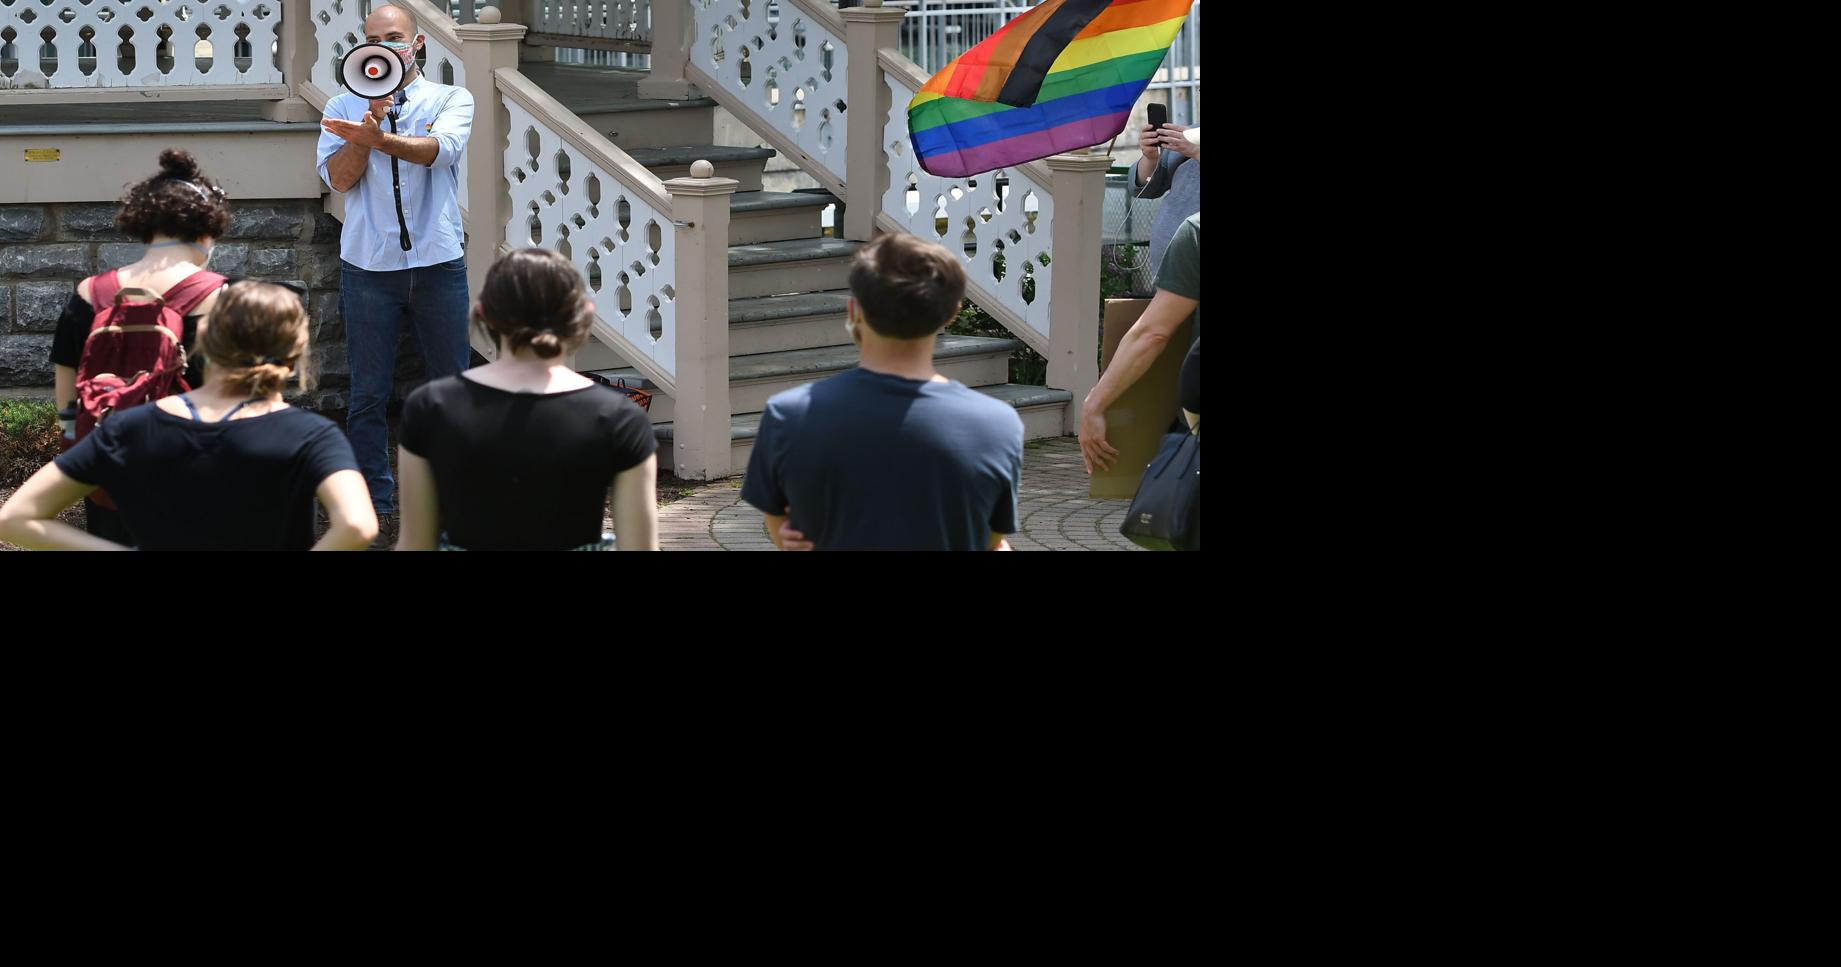 Skaneateles Pride flag protester clashes with school district